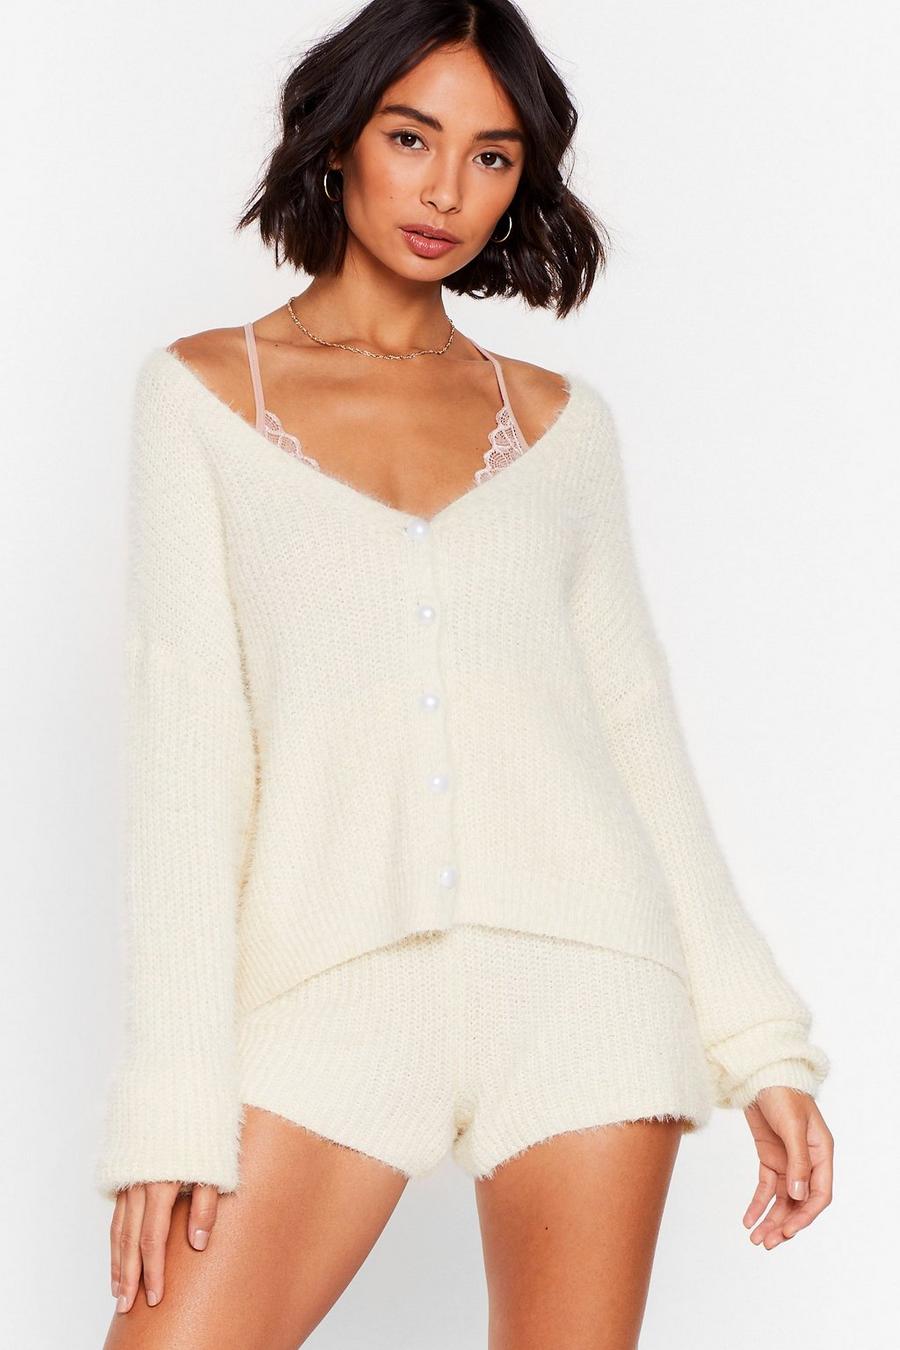 What a Pearl Wants Fluffy Knit Lounge Set